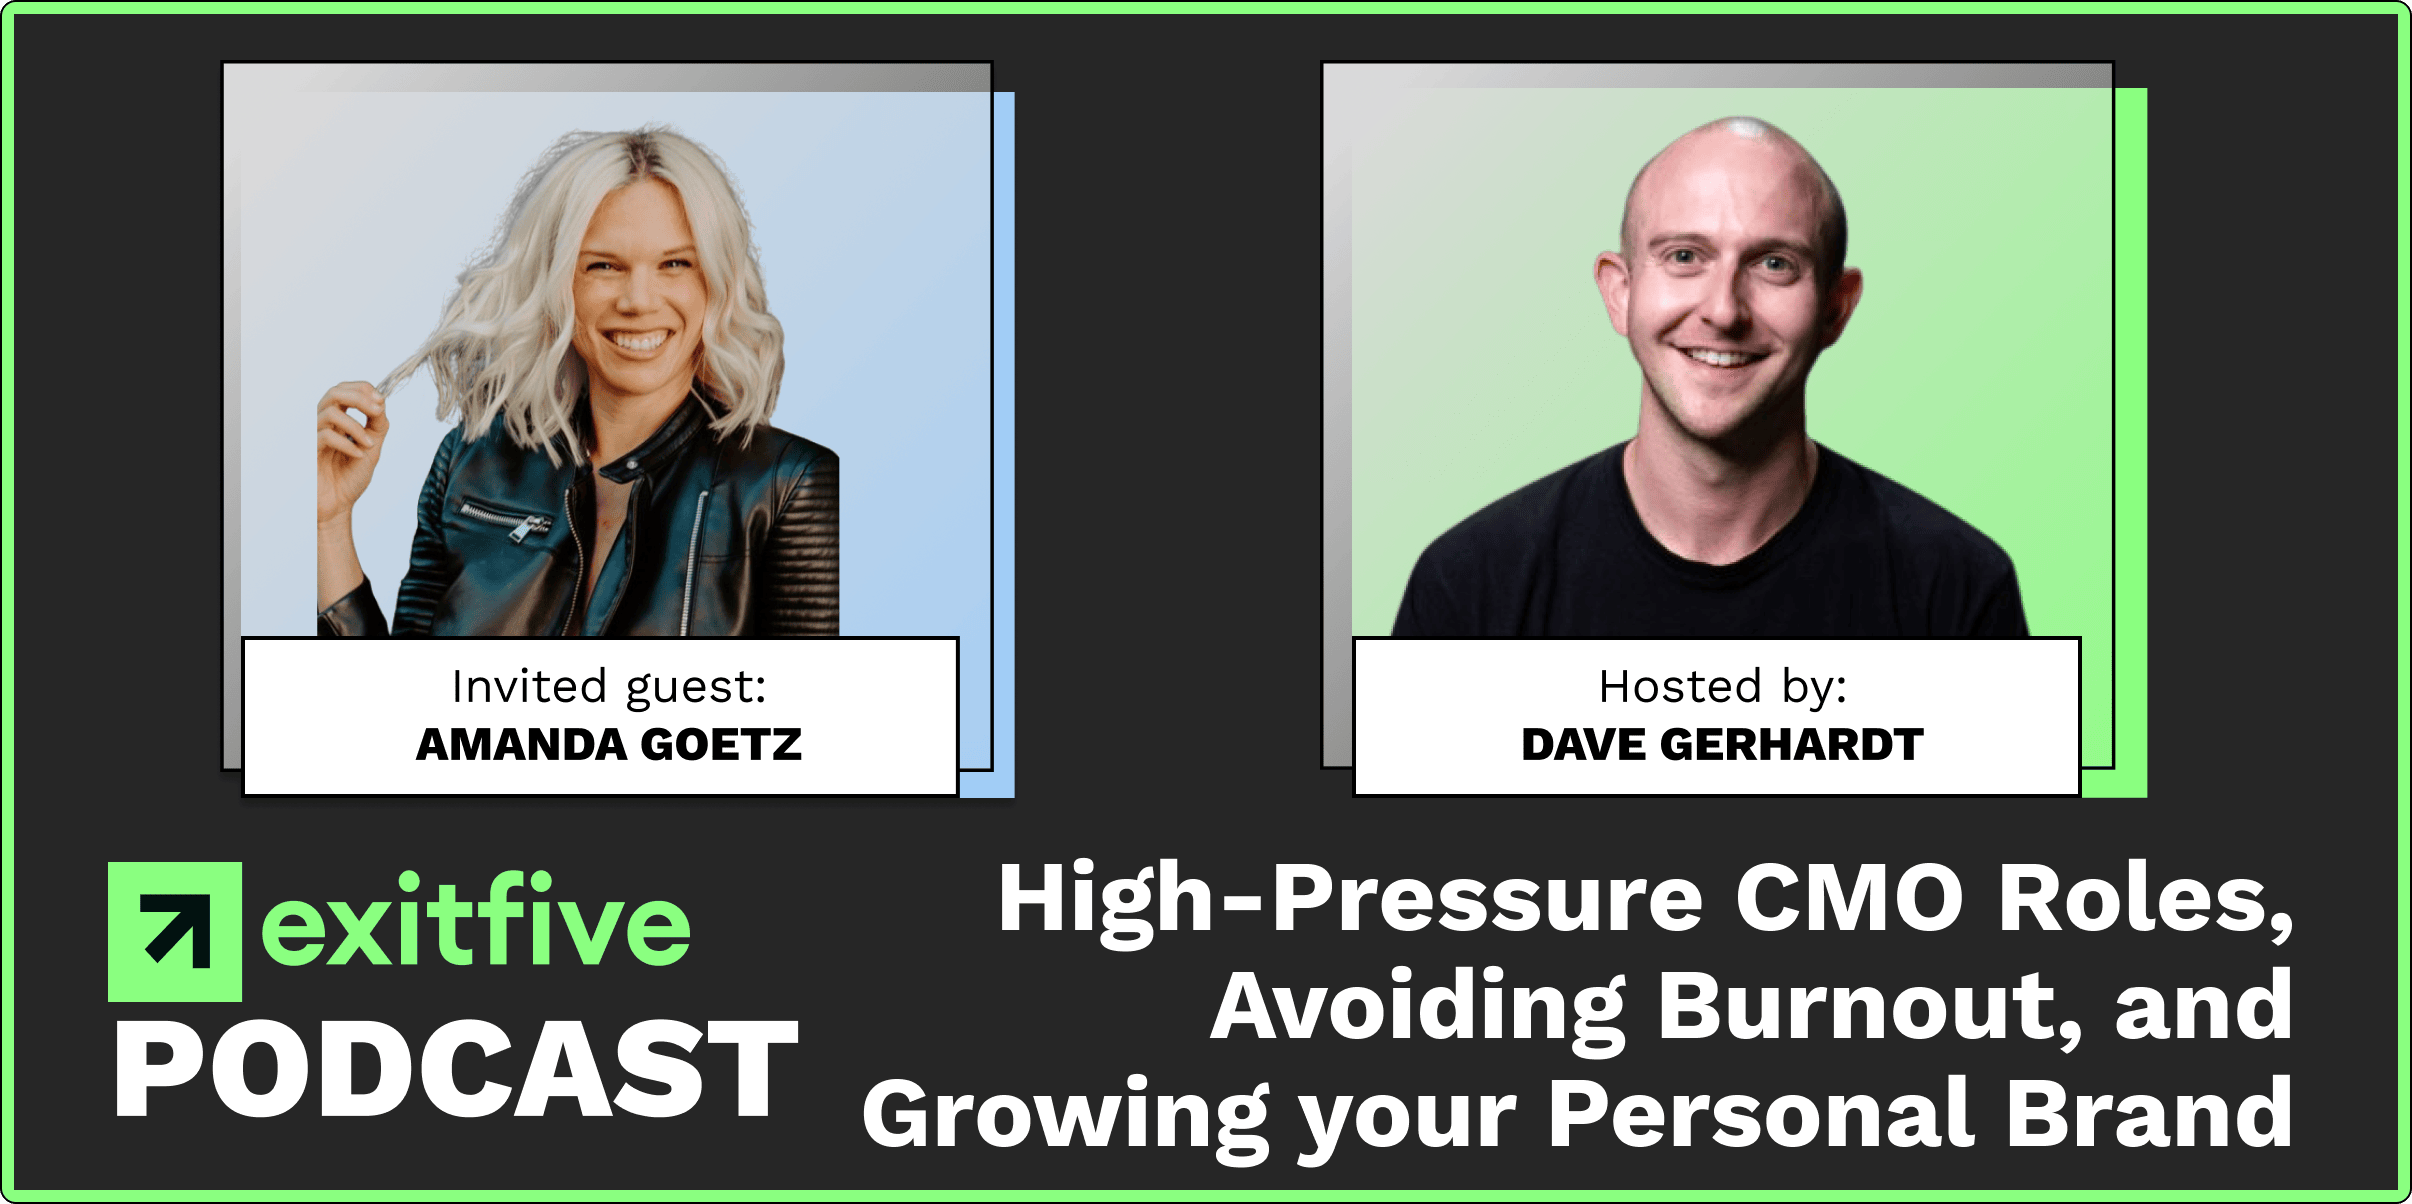 Career | High-Pressure CMO Roles, Avoiding Burnout, and Growing your Personal Brand with Amanda Goetz